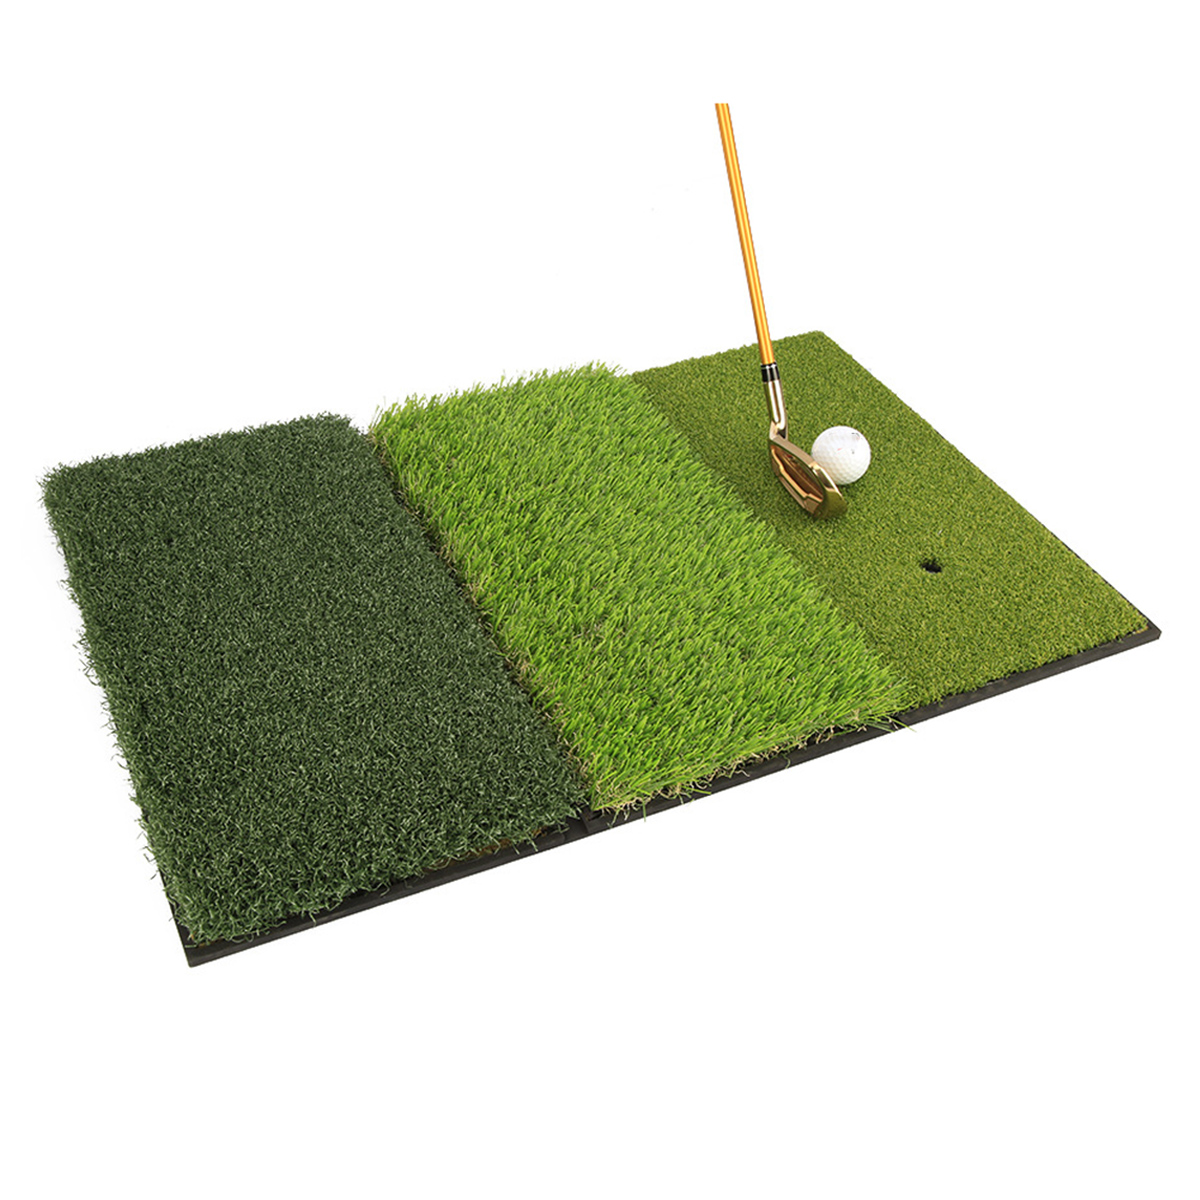 6441CM-3-in-1-Golf-Hitting-Mat-Multi-Function-Tri-Turf-Golf-Practice-Training-for-Chipping-Practice--1759463-7